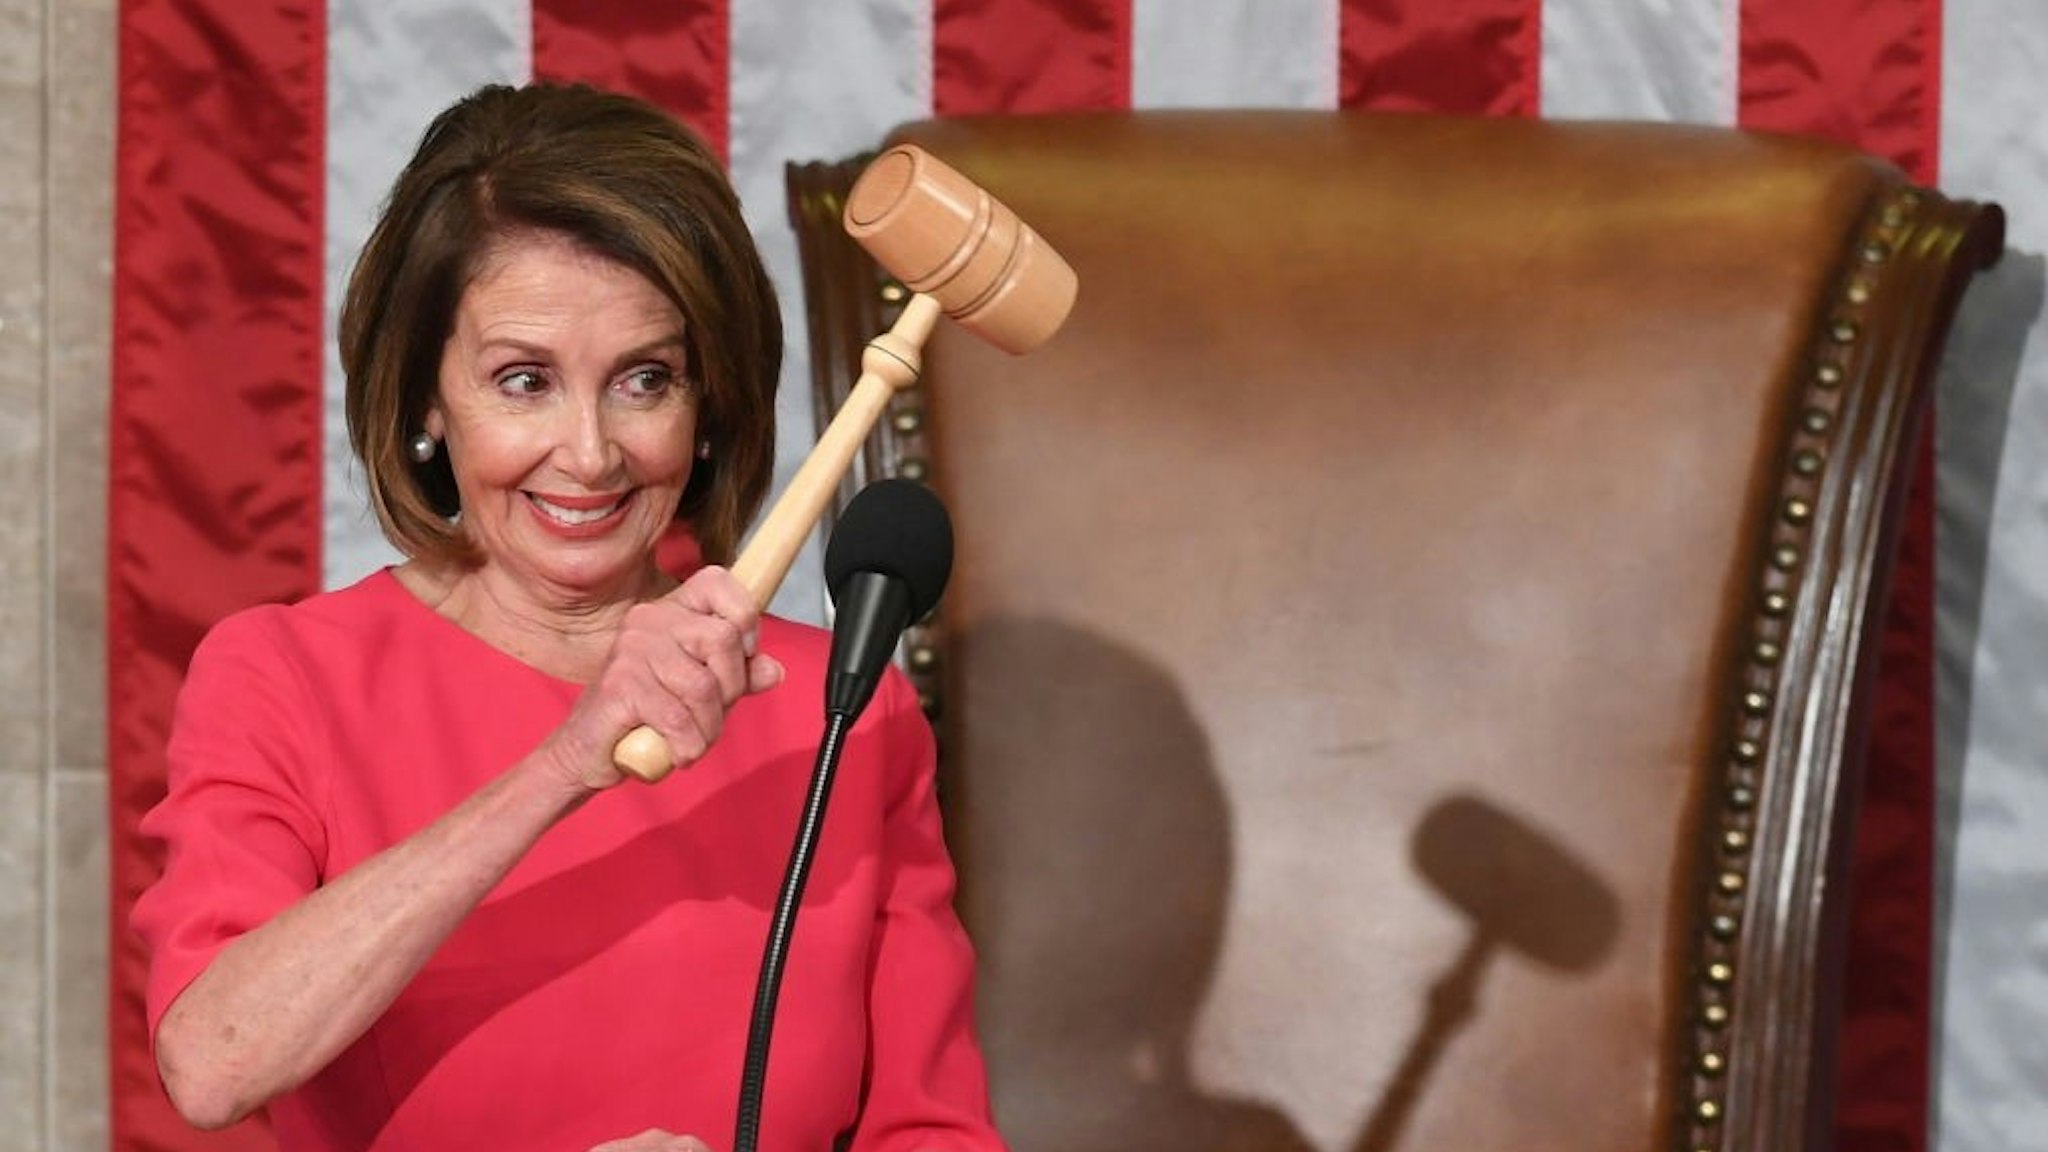 New Speaker of the US House of Representatives Nancy Pelosi, D-CA, holds the gavel during the opening session of the 116th Congress at the US Capitol in Washington, DC, January 3, 2019. (Photo by SAUL LOEB / AFP) (Photo by